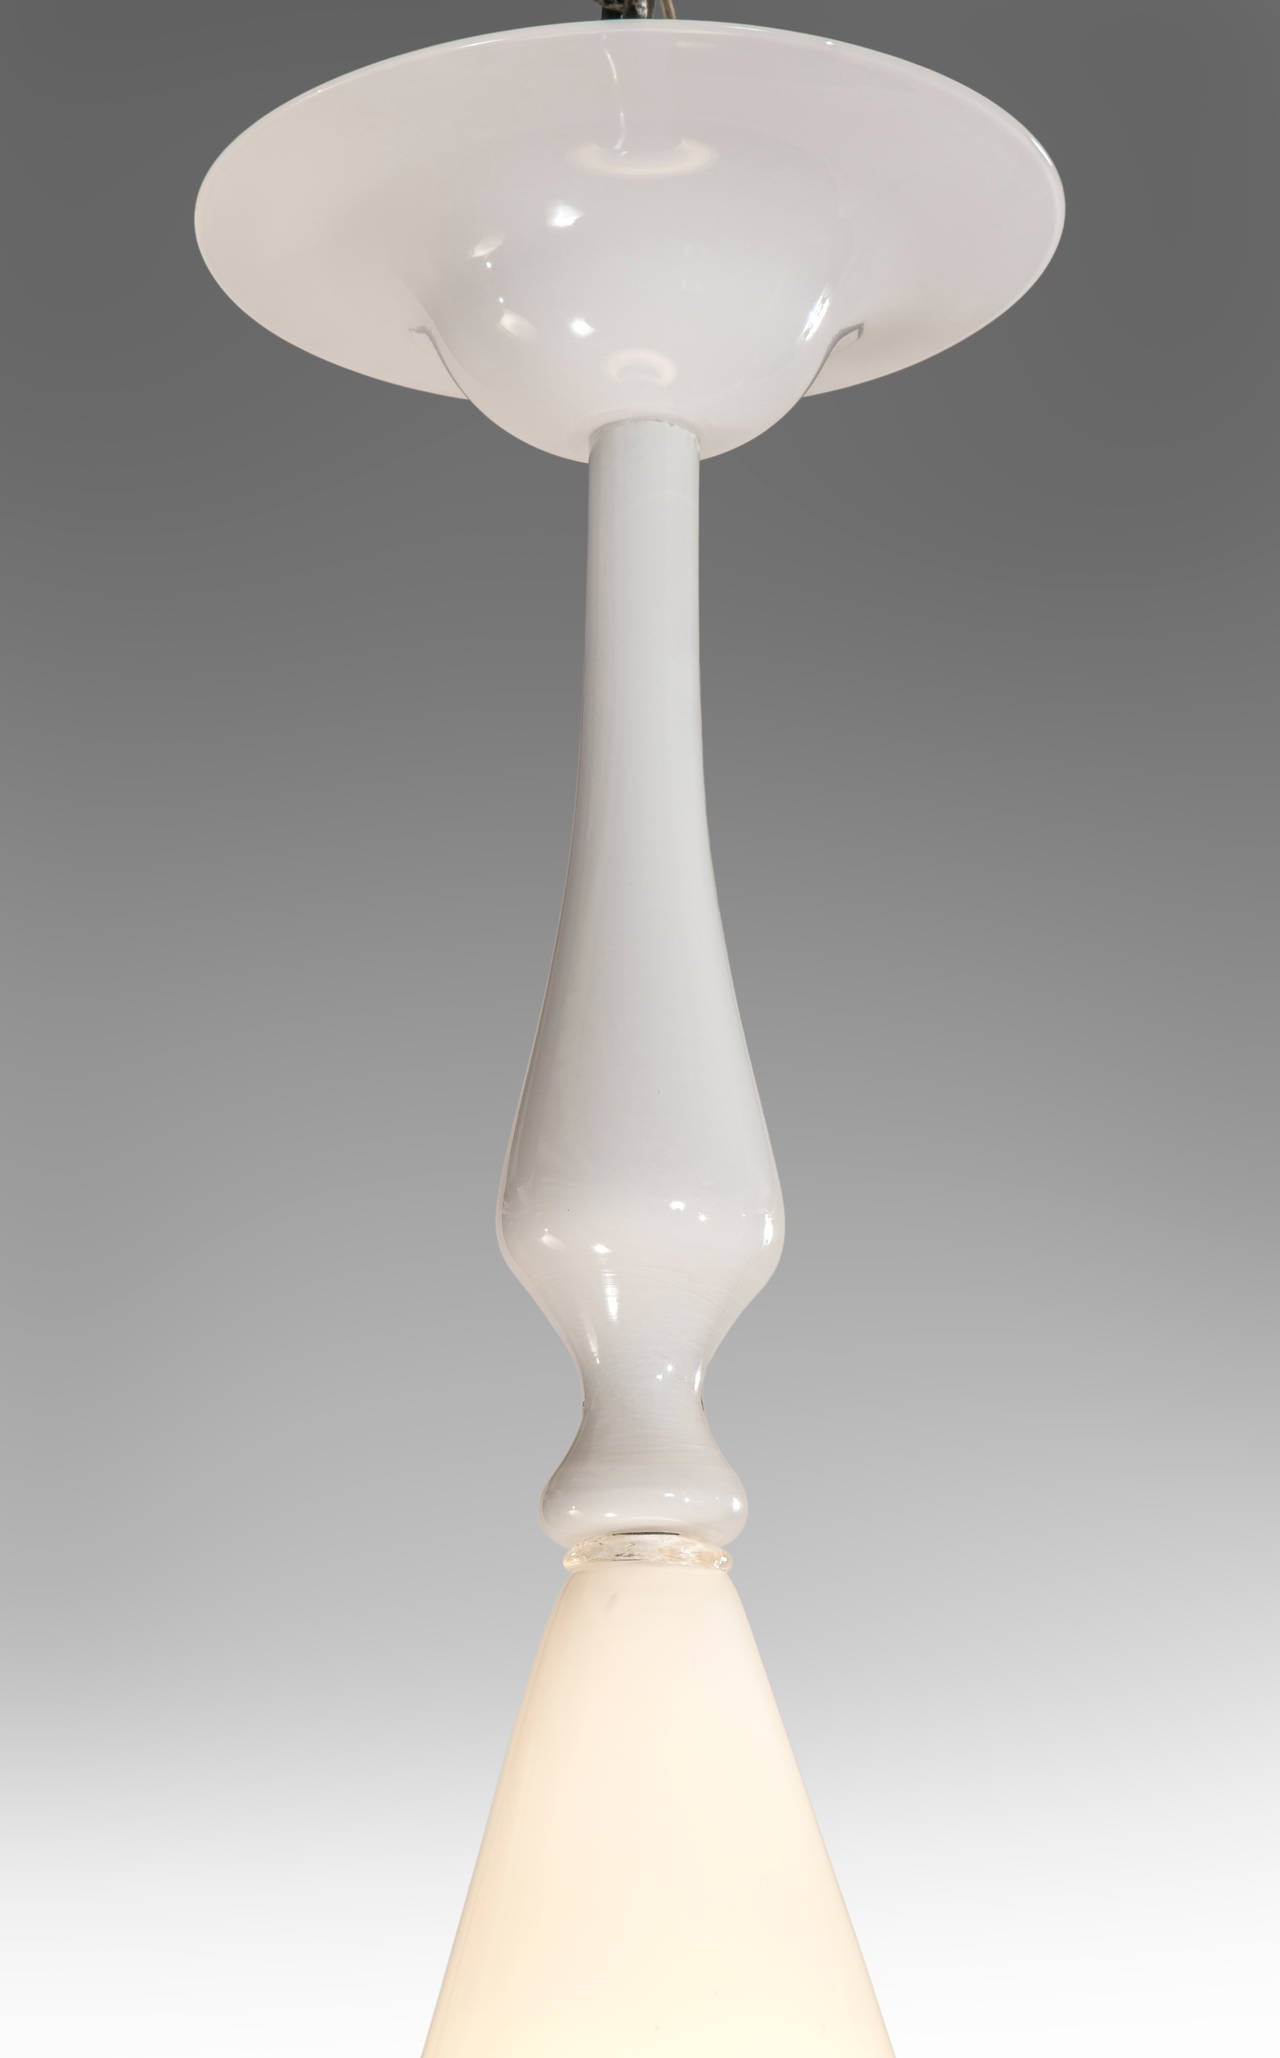 Extremely rare and elegant chandelier in the form of a lantern by Carlo Scarpa for Cappellin adorned by glass plumes and composed of beautiful milky opaque glass. The glass canopy above a shaped stem, the body composed of two opposing cones, with